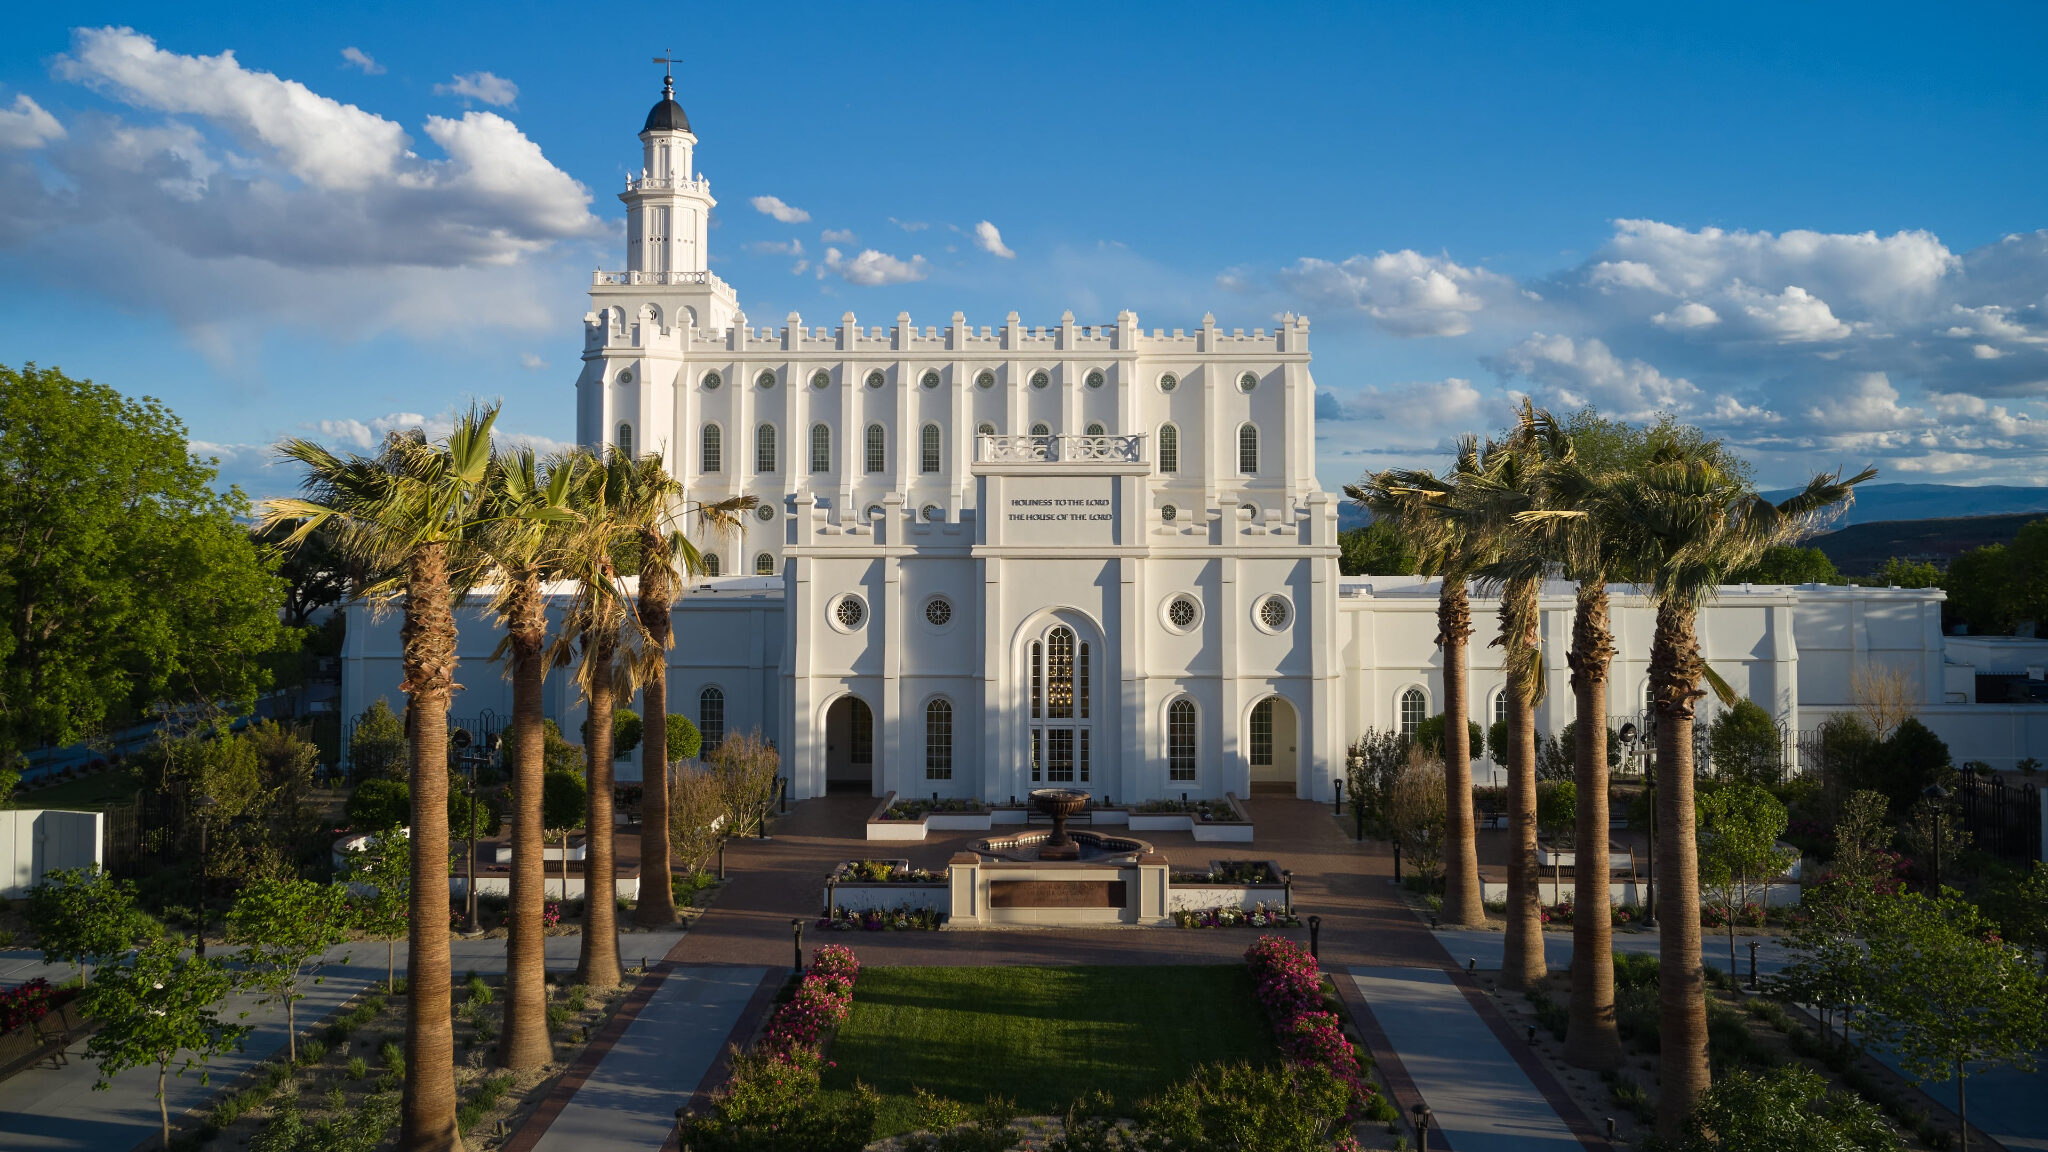 An open house for the St. George Utah Temple will begin on Friday, Sept. 15 and run through Saturda...